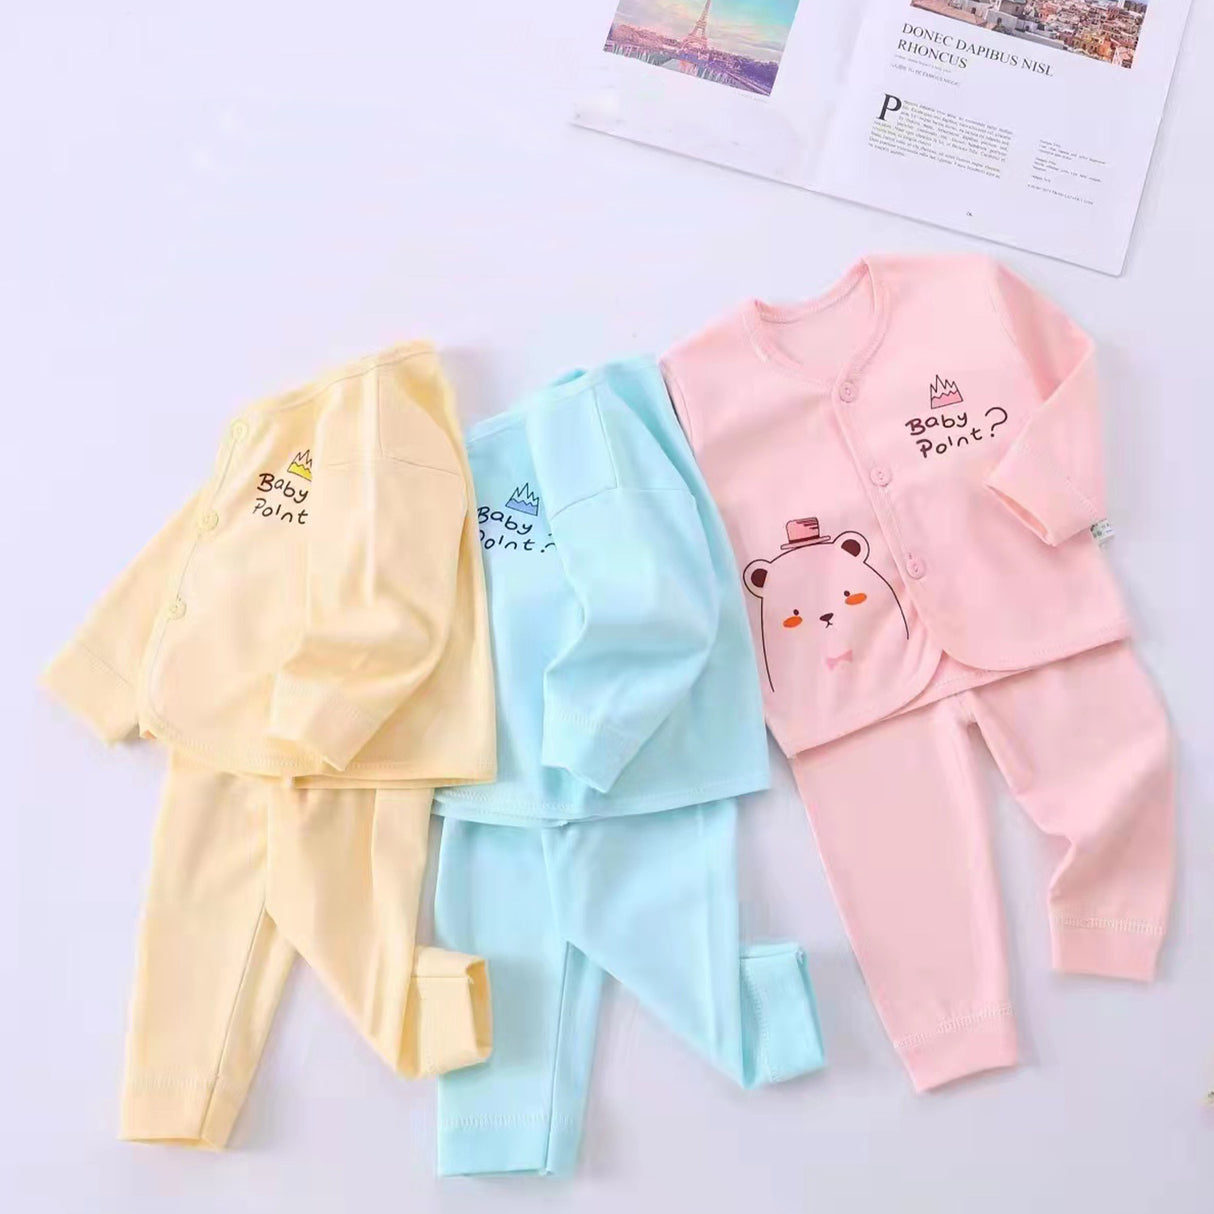 Gentle Bear Full Sleeves Top And Pyjama Buttoned Cotton Night Suit